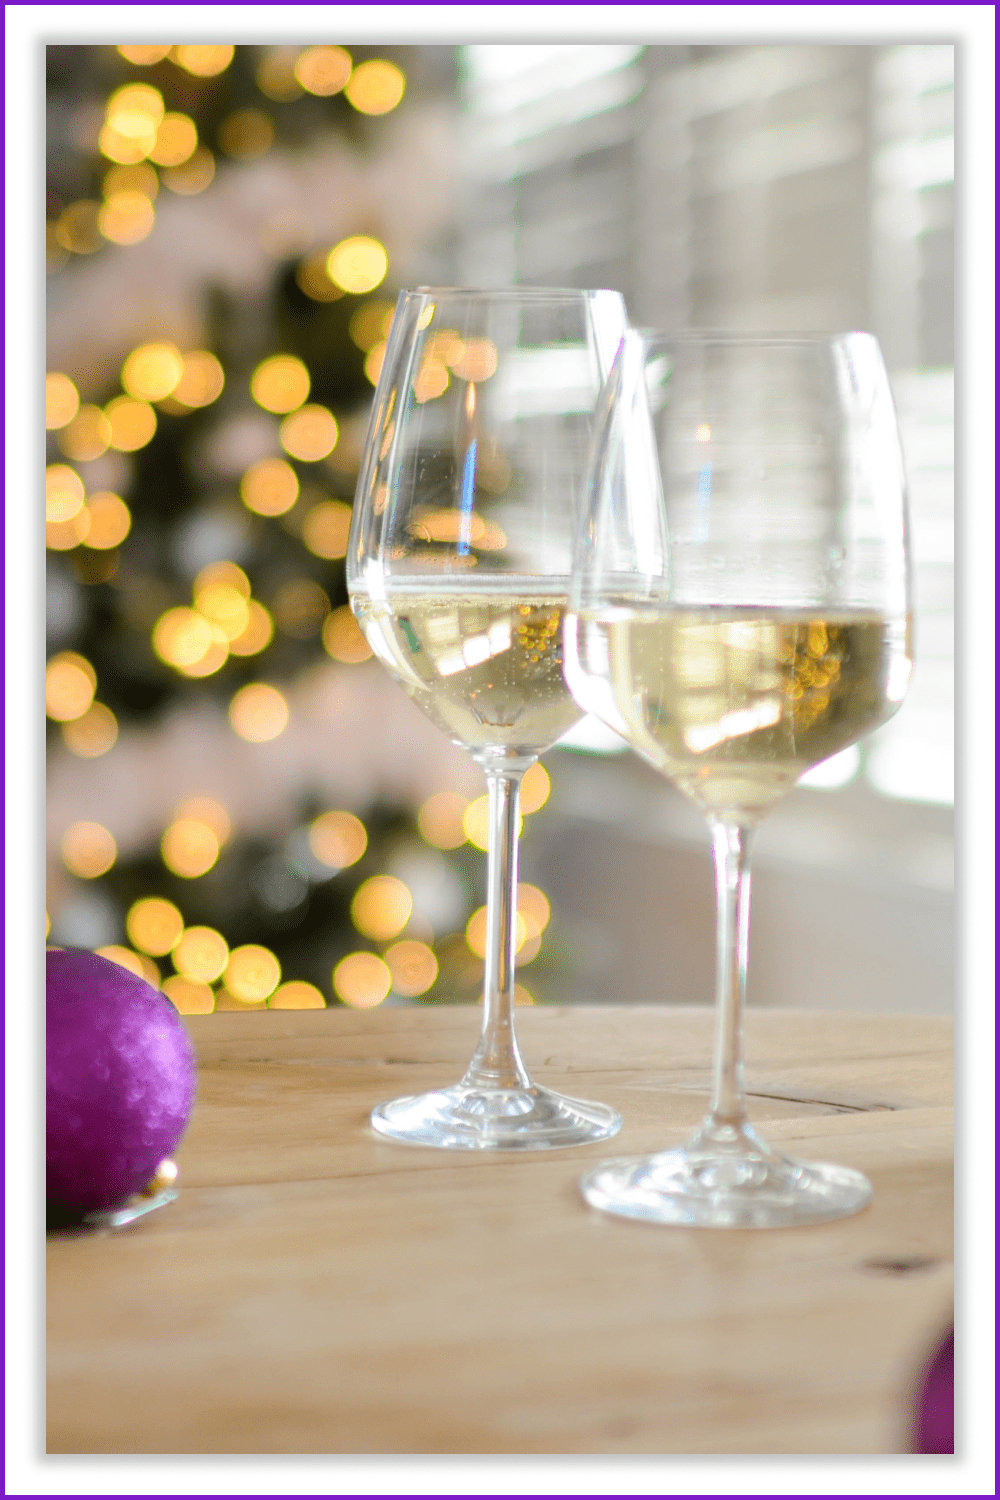 Two glasses of champagne on the table against the background of the Christmas tree.